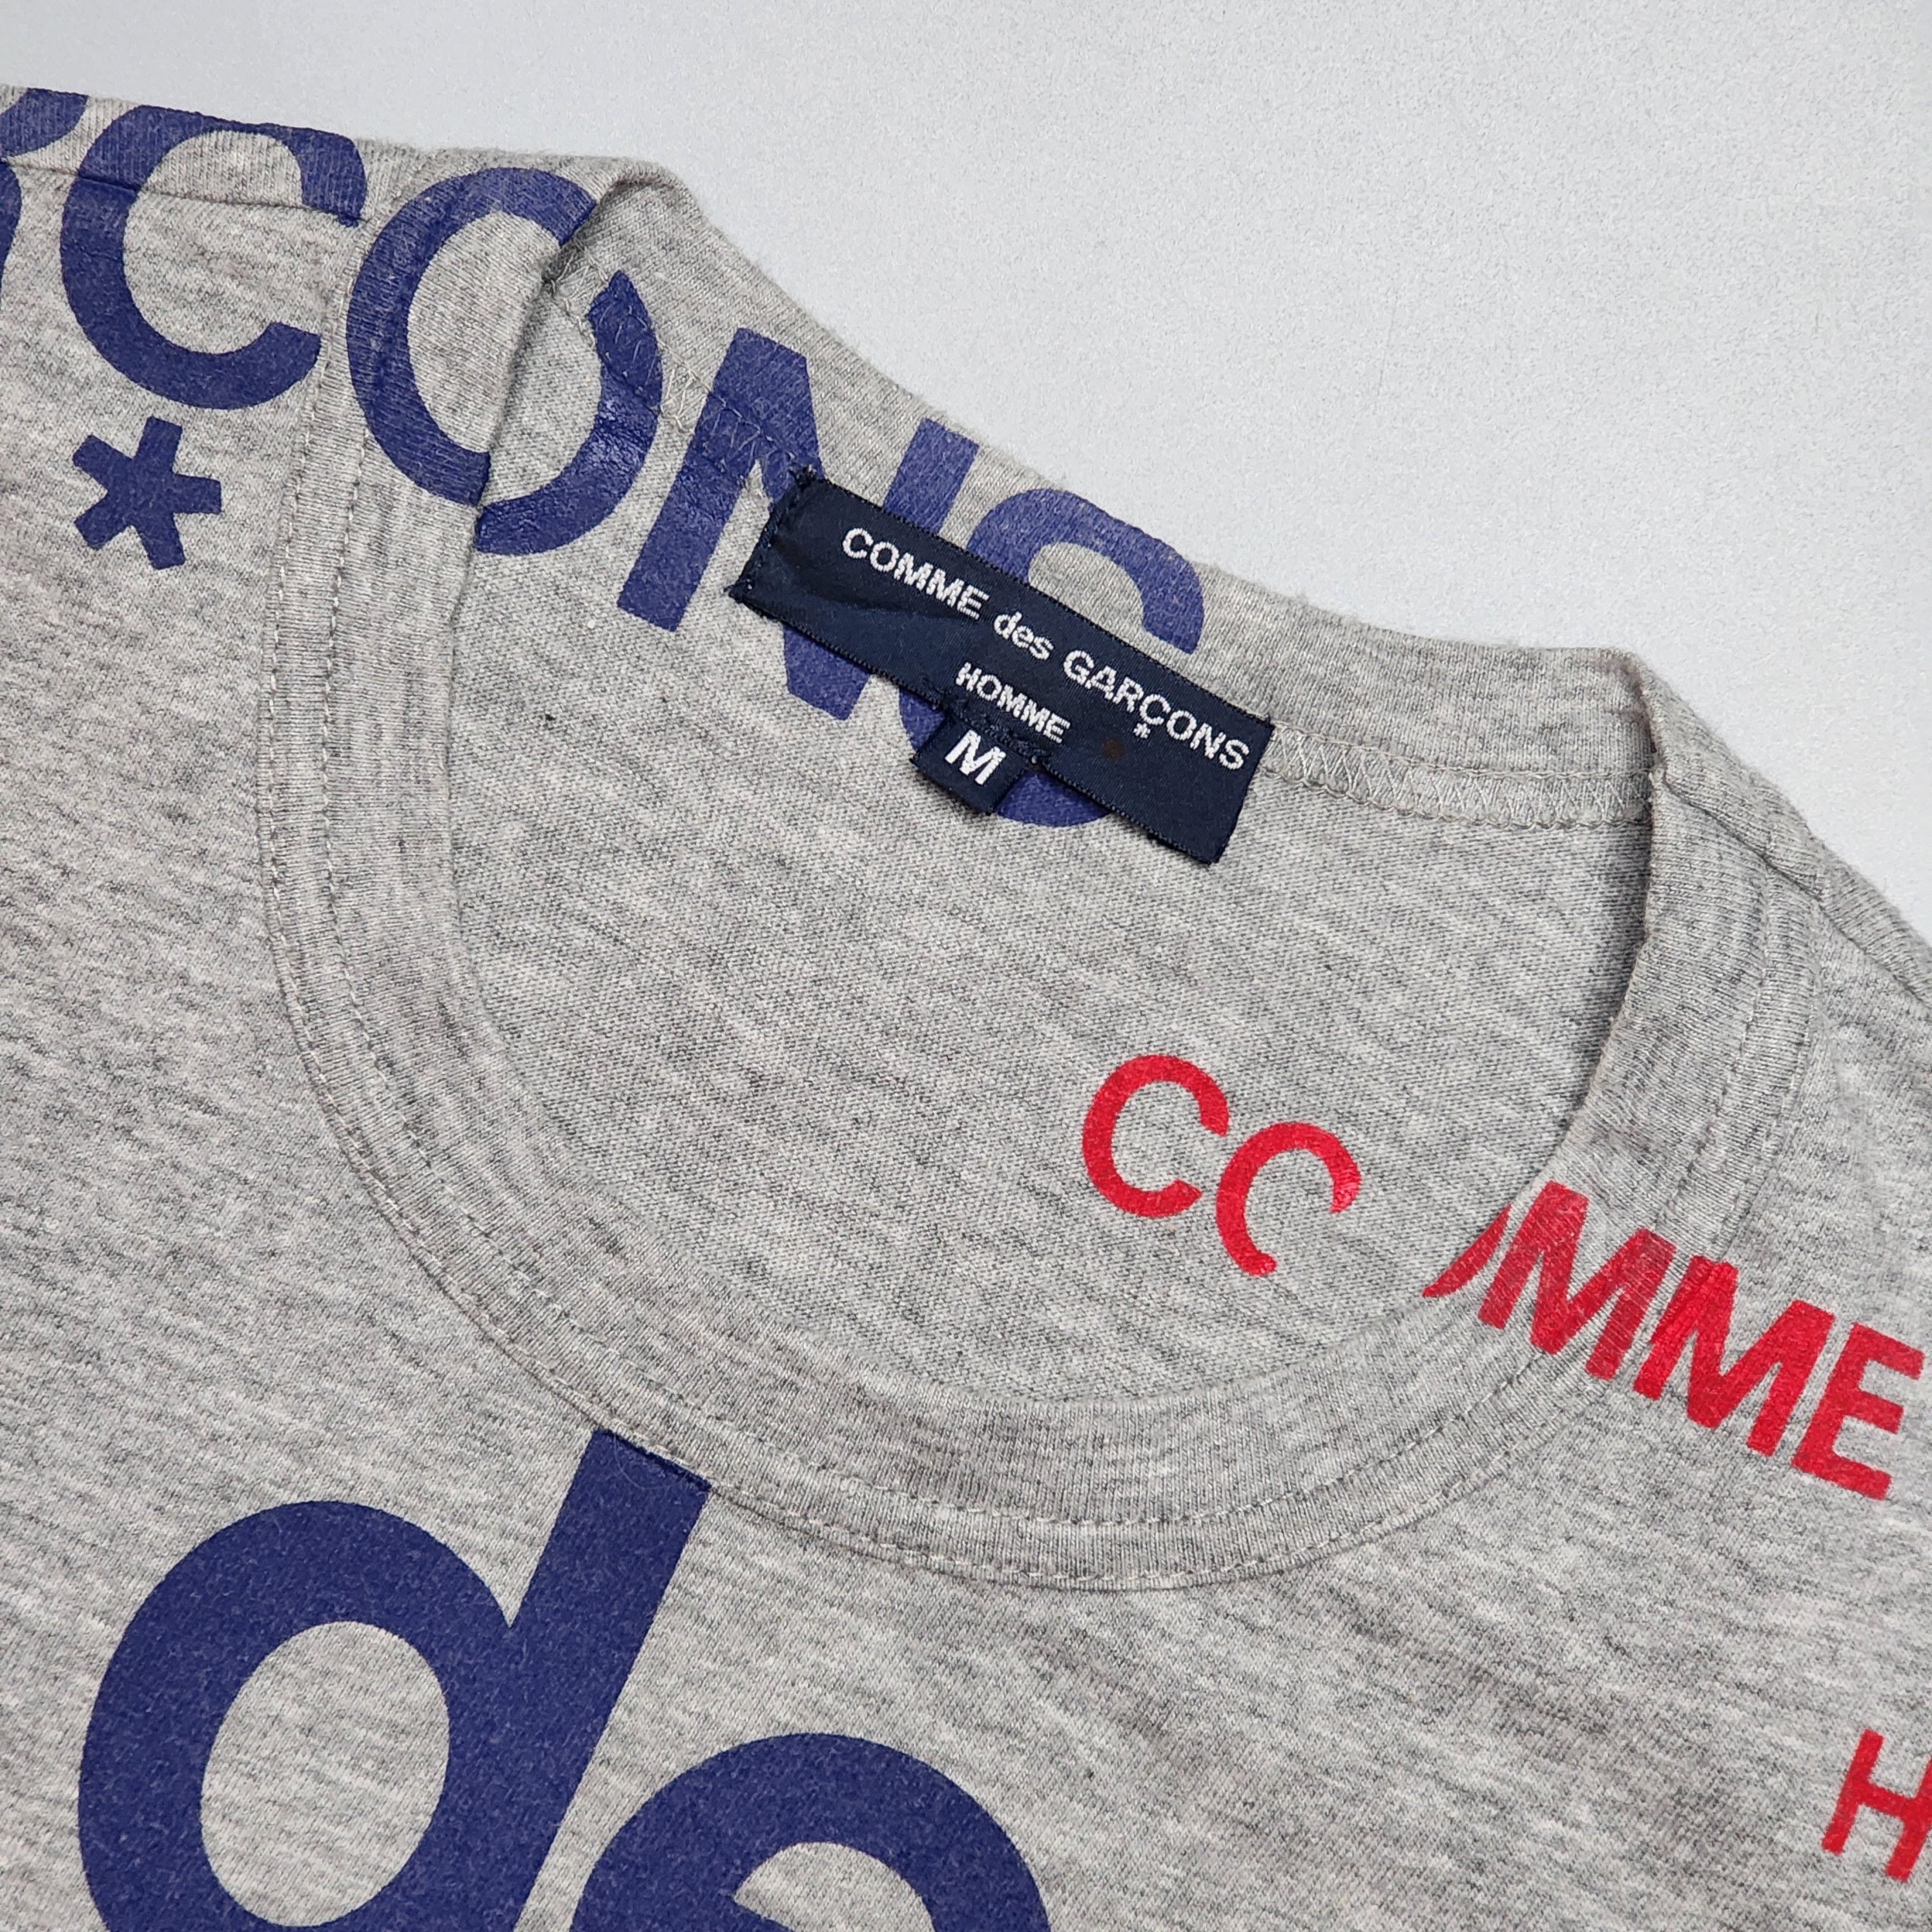 Comme Des Garcons Homme - 2006 All Over Printed T-Shirt - 3